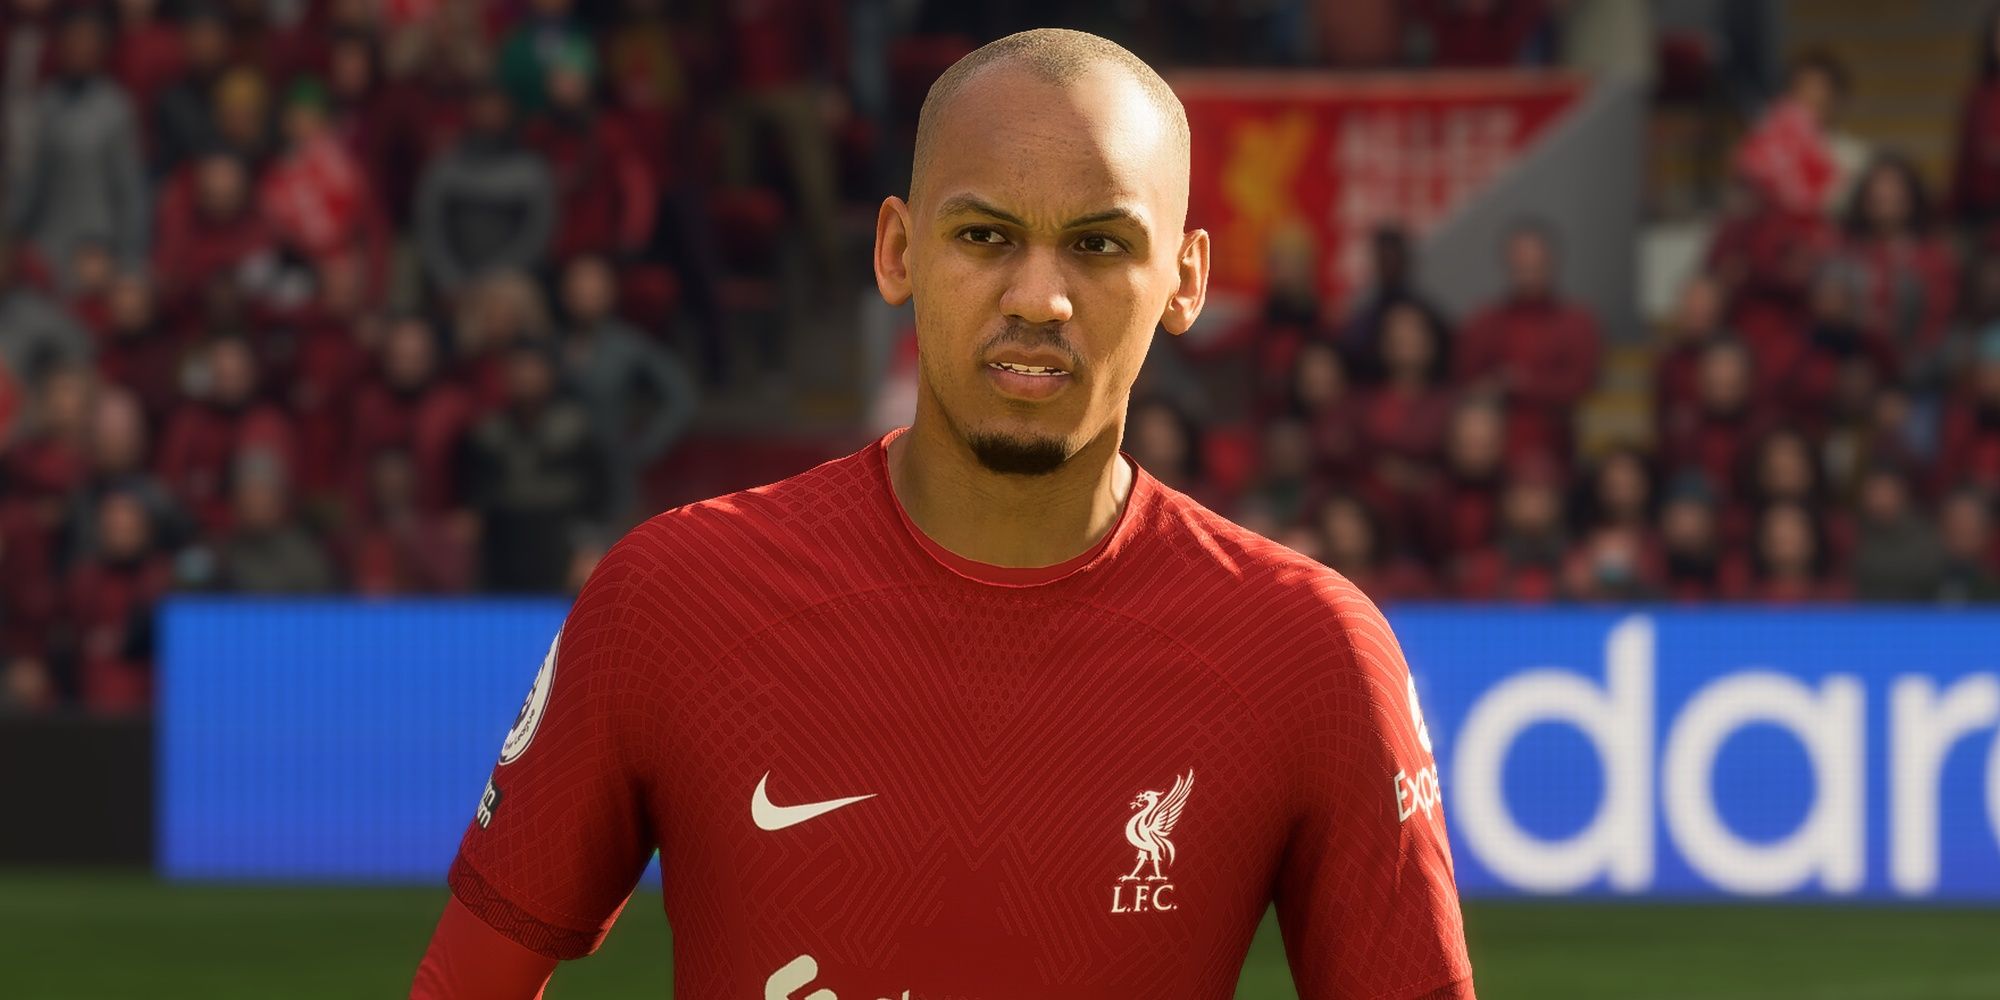 Hi-res still of Fabinho during a game for Liverpool F.C. in FIFA 23